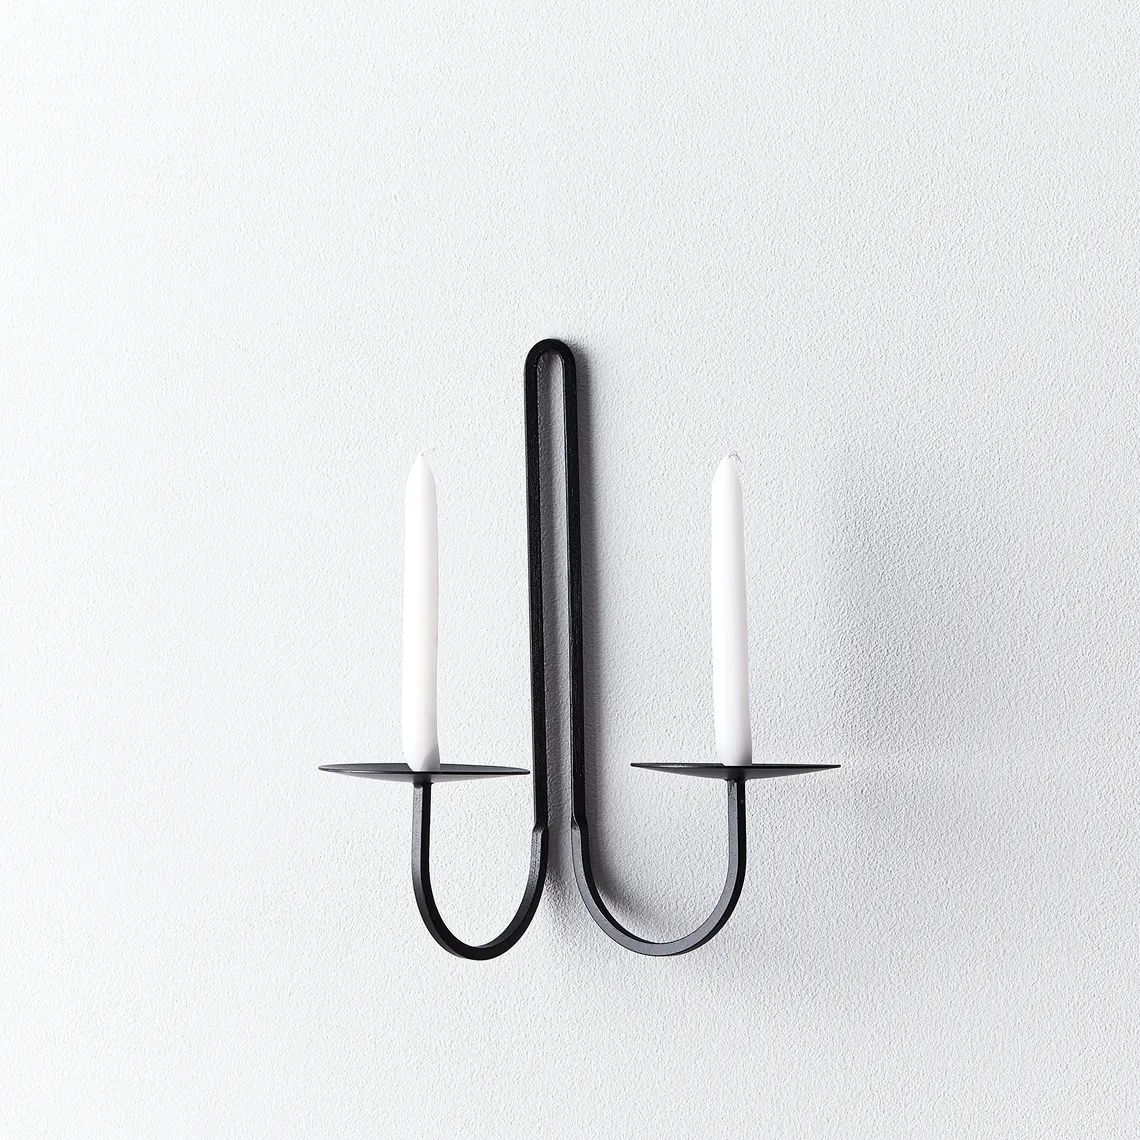 Fredericks & Mae Taper Candleholder Wall Sconce & Candles, 3 Sizes | Food52